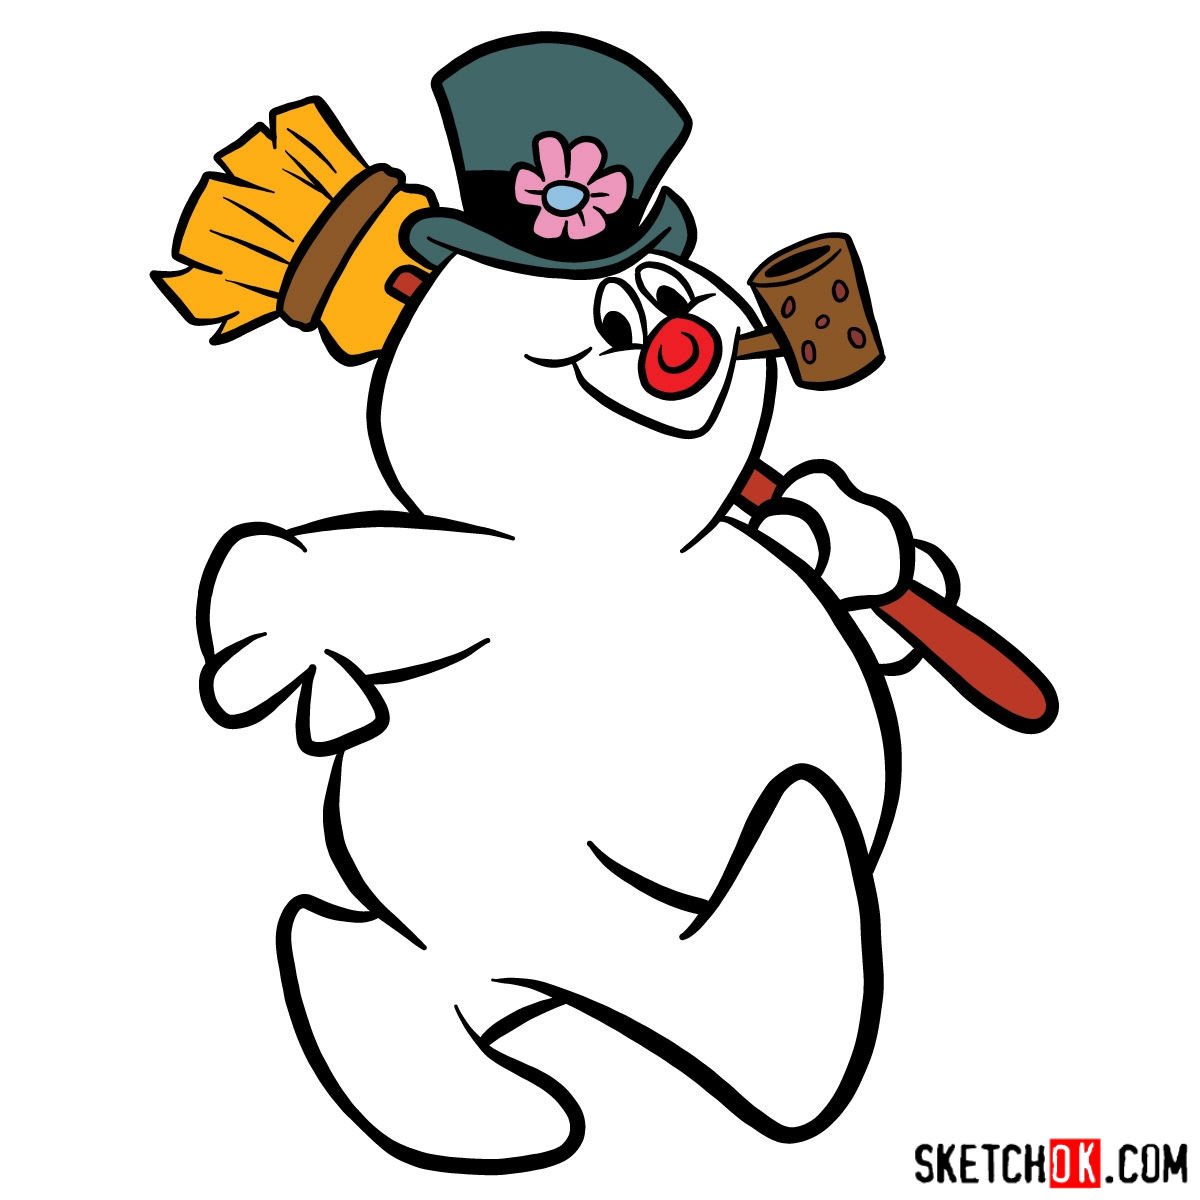 How to draw Frosty the Snowman